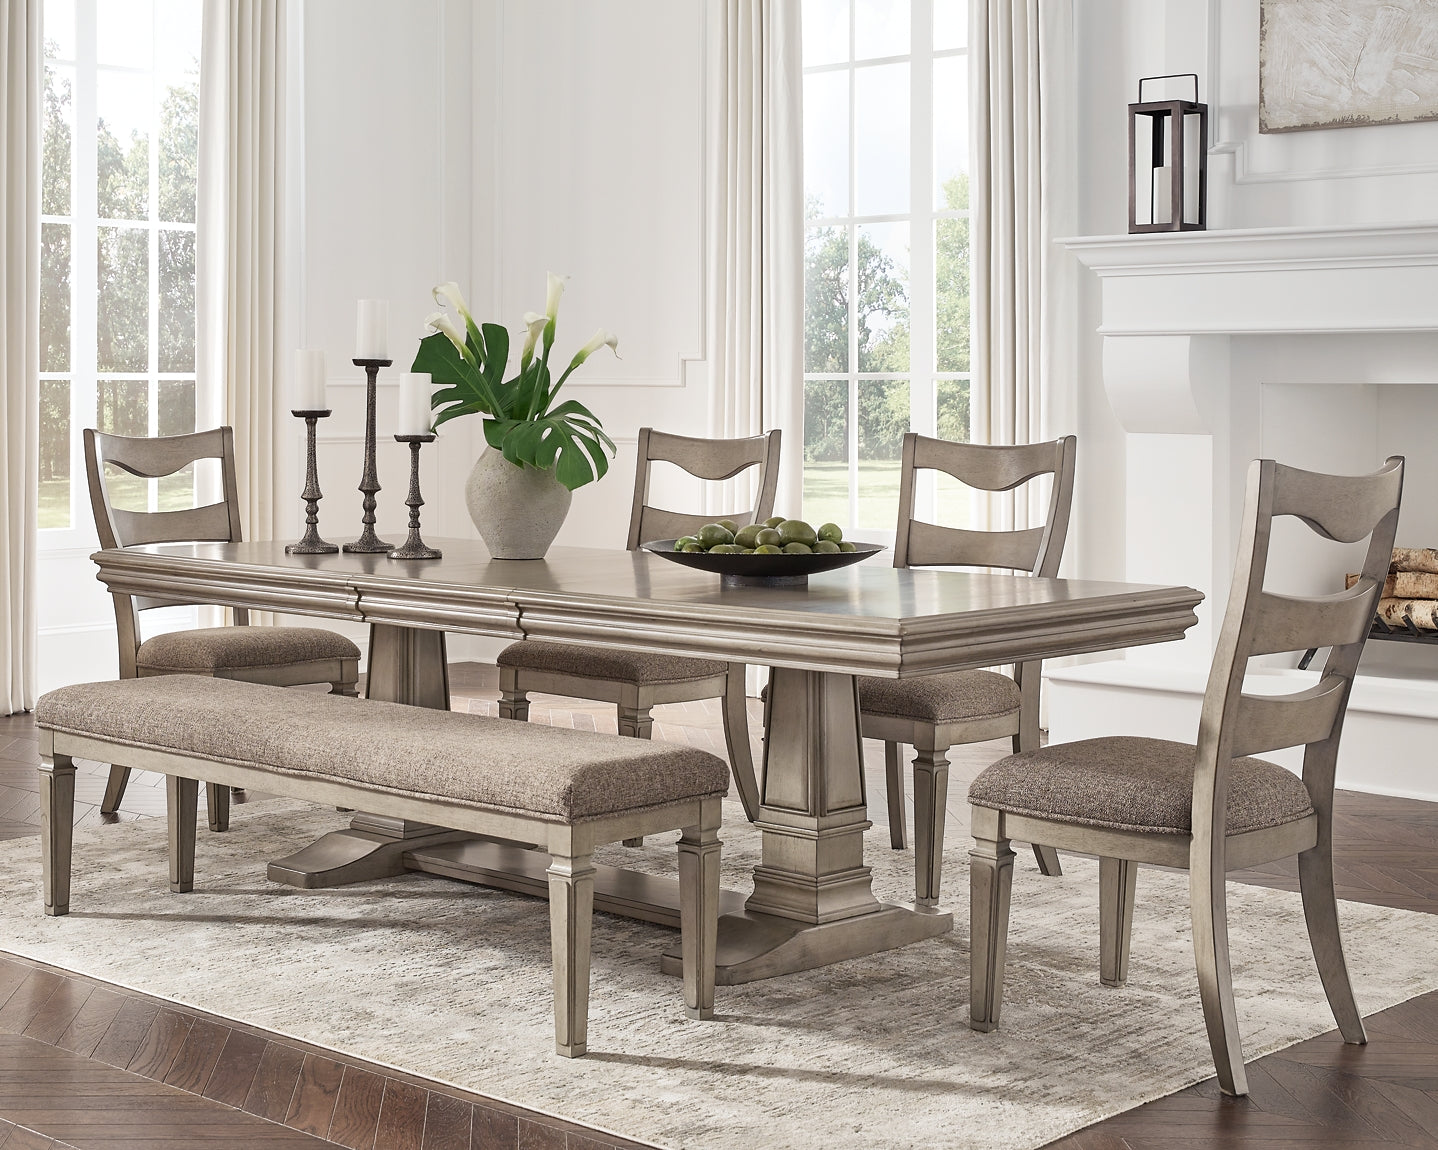 Lexorne Dining Table and 4 Chairs and Bench Wilson Furniture (OH)  in Bridgeport, Ohio. Serving Bridgeport, Yorkville, Bellaire, & Avondale